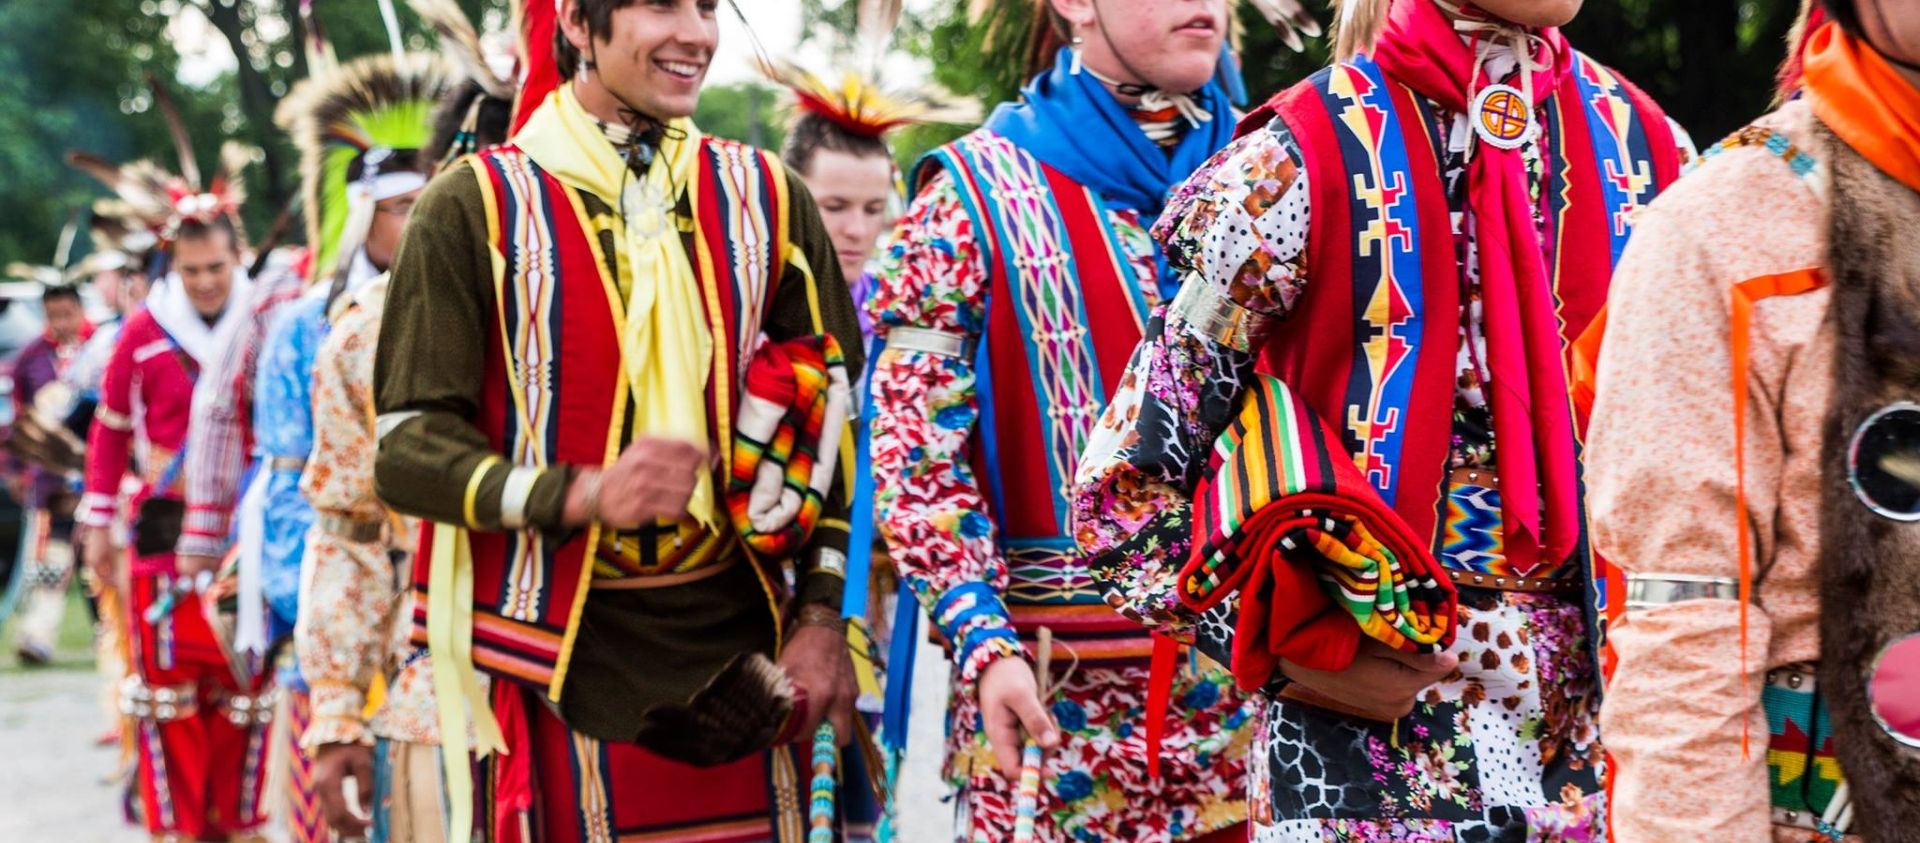 Grayhorse men in traditional clothing. 